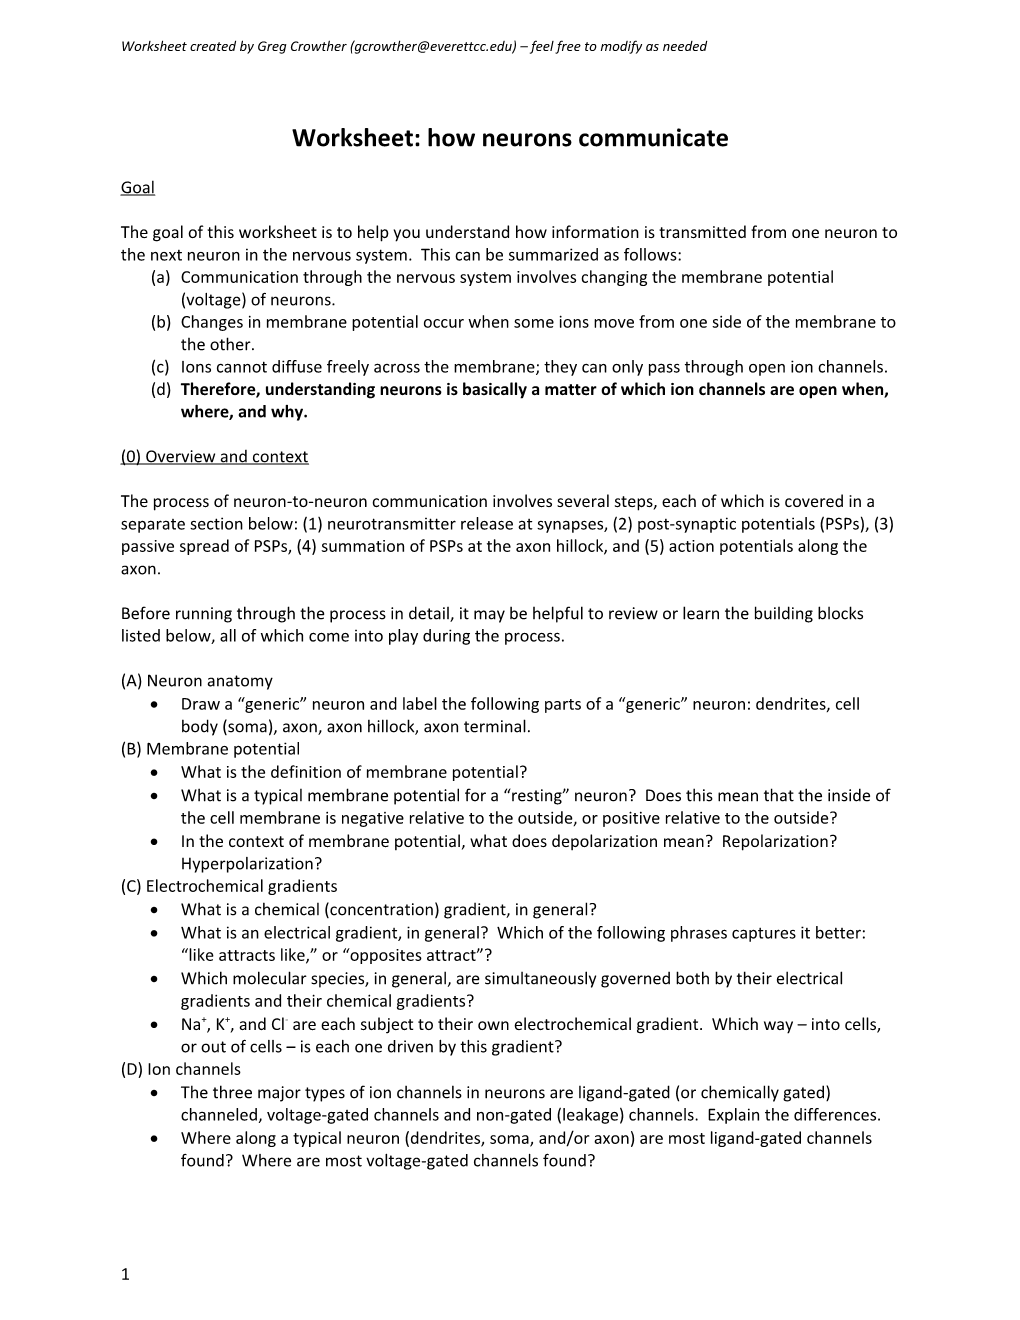 Worksheet Created by Greg Crowther () Feel Free to Modify As Needed